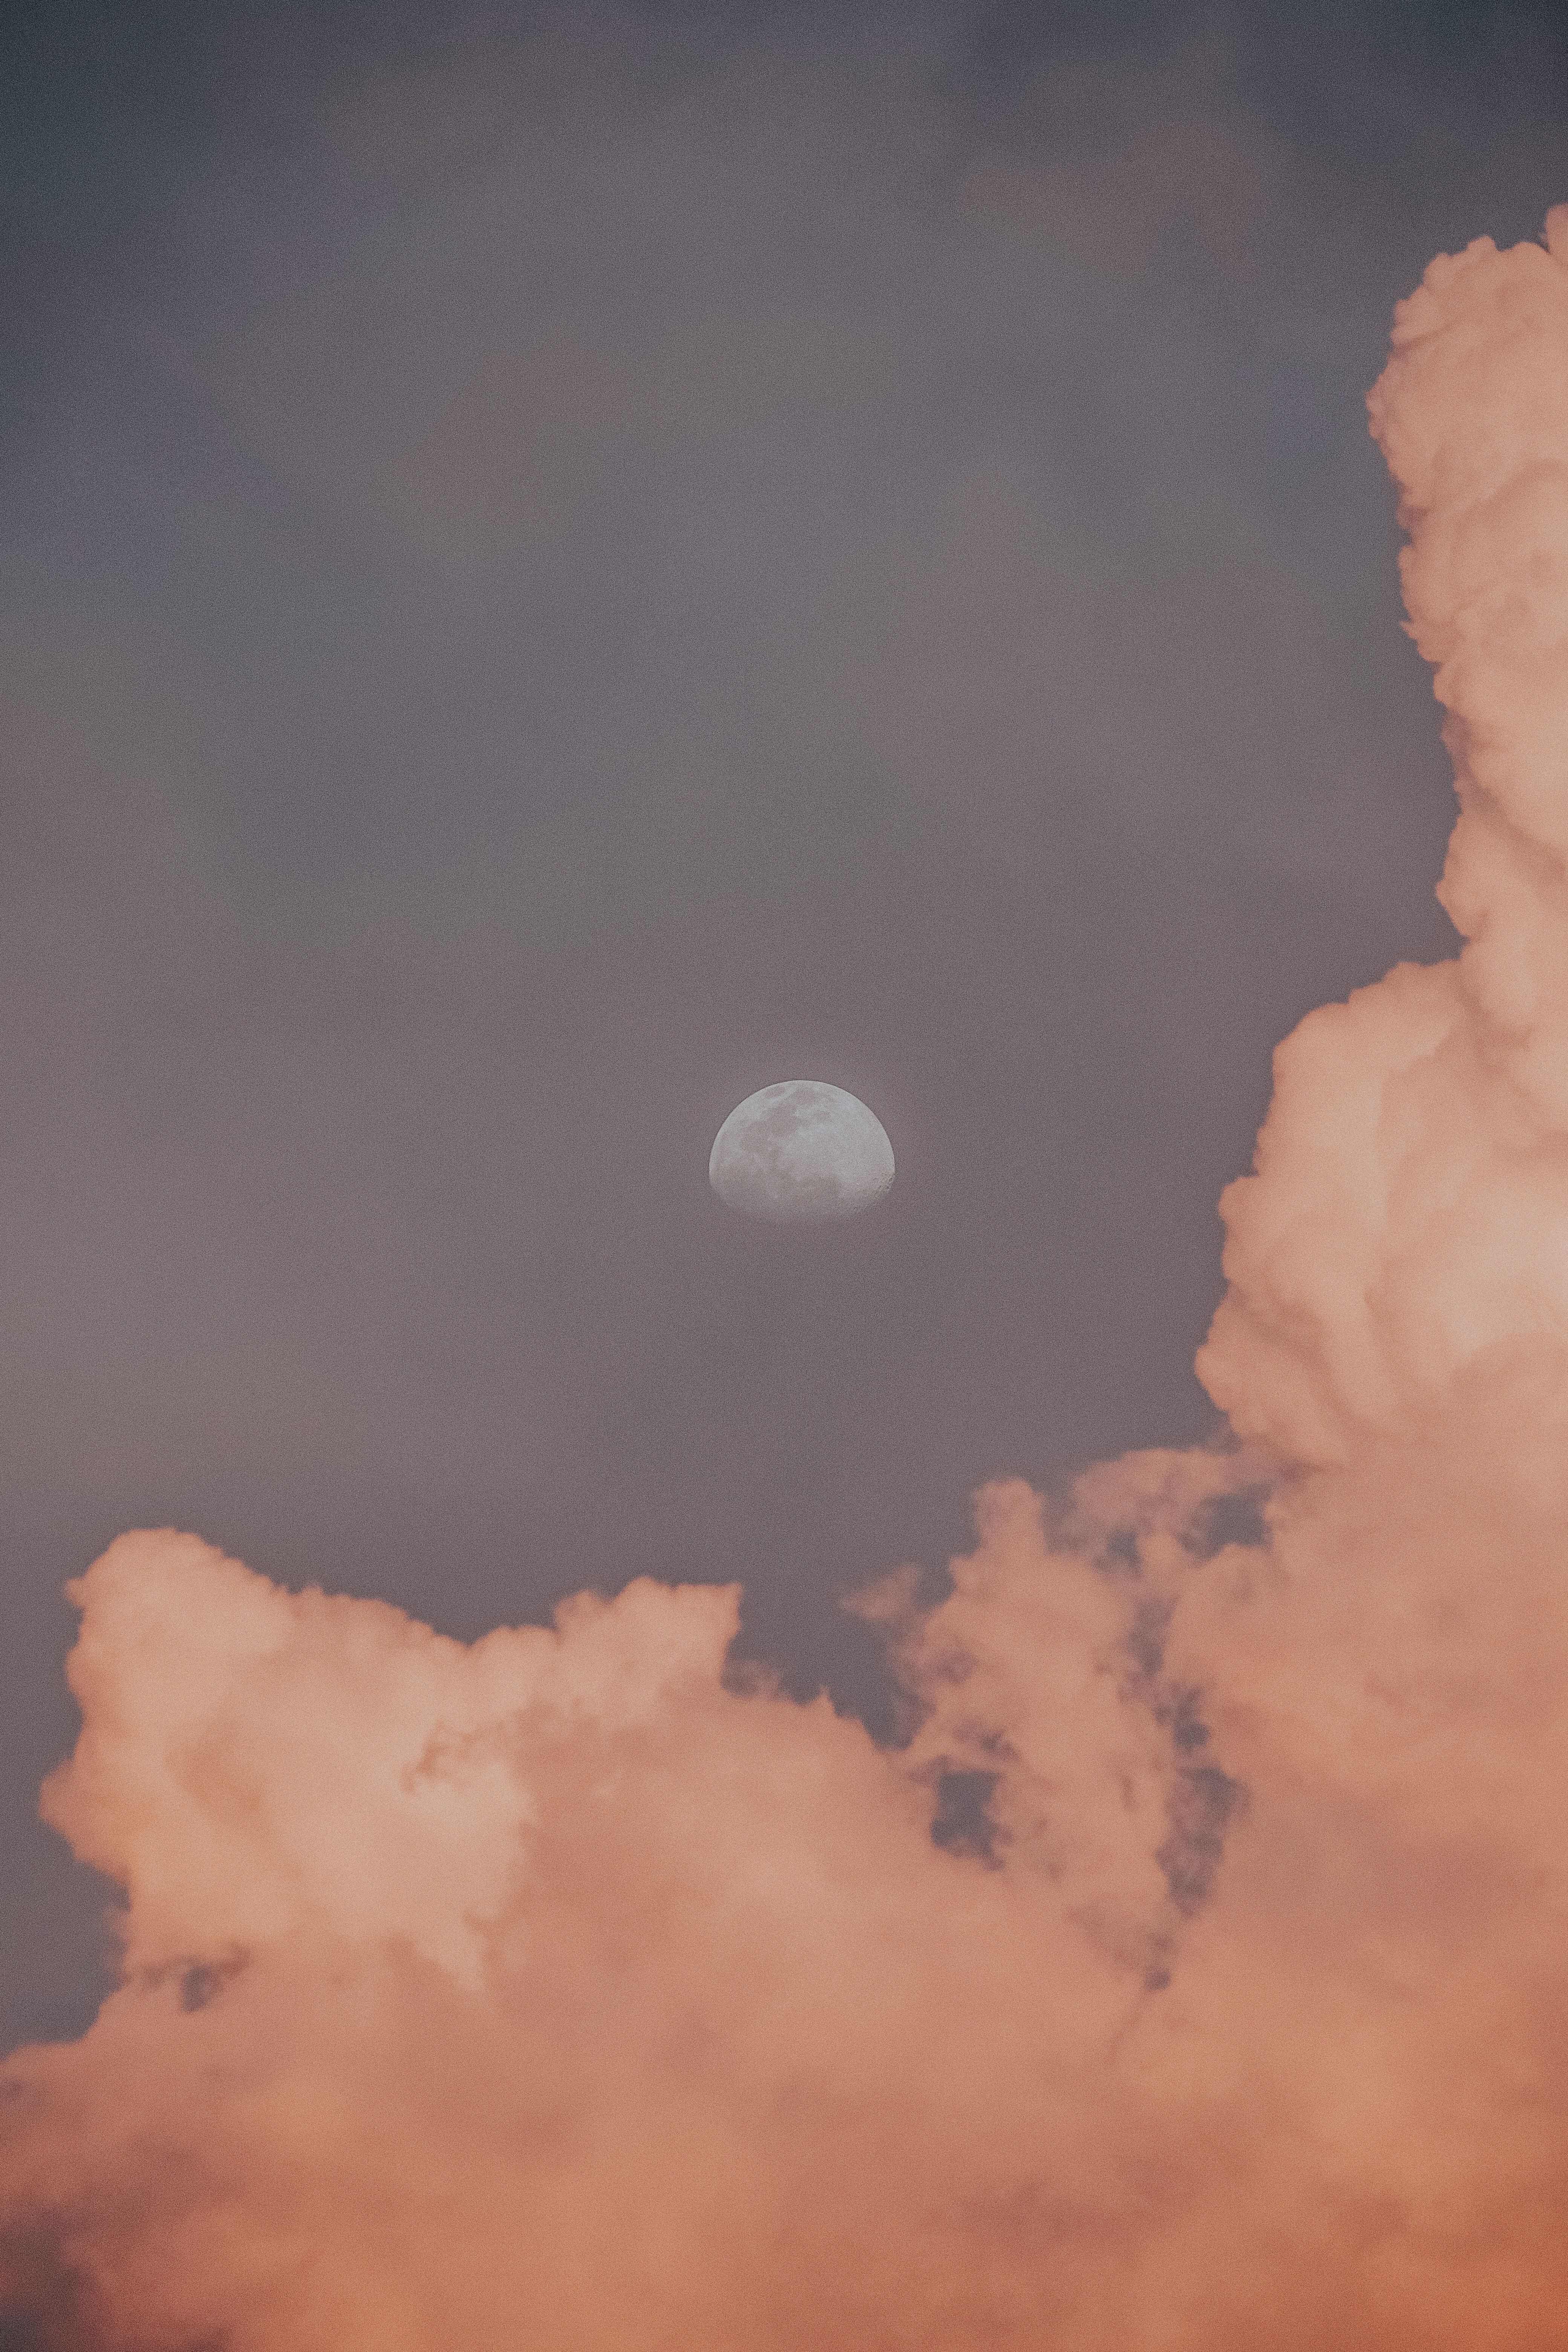 A plane flying over the moon in front of clouds - Vintage clouds